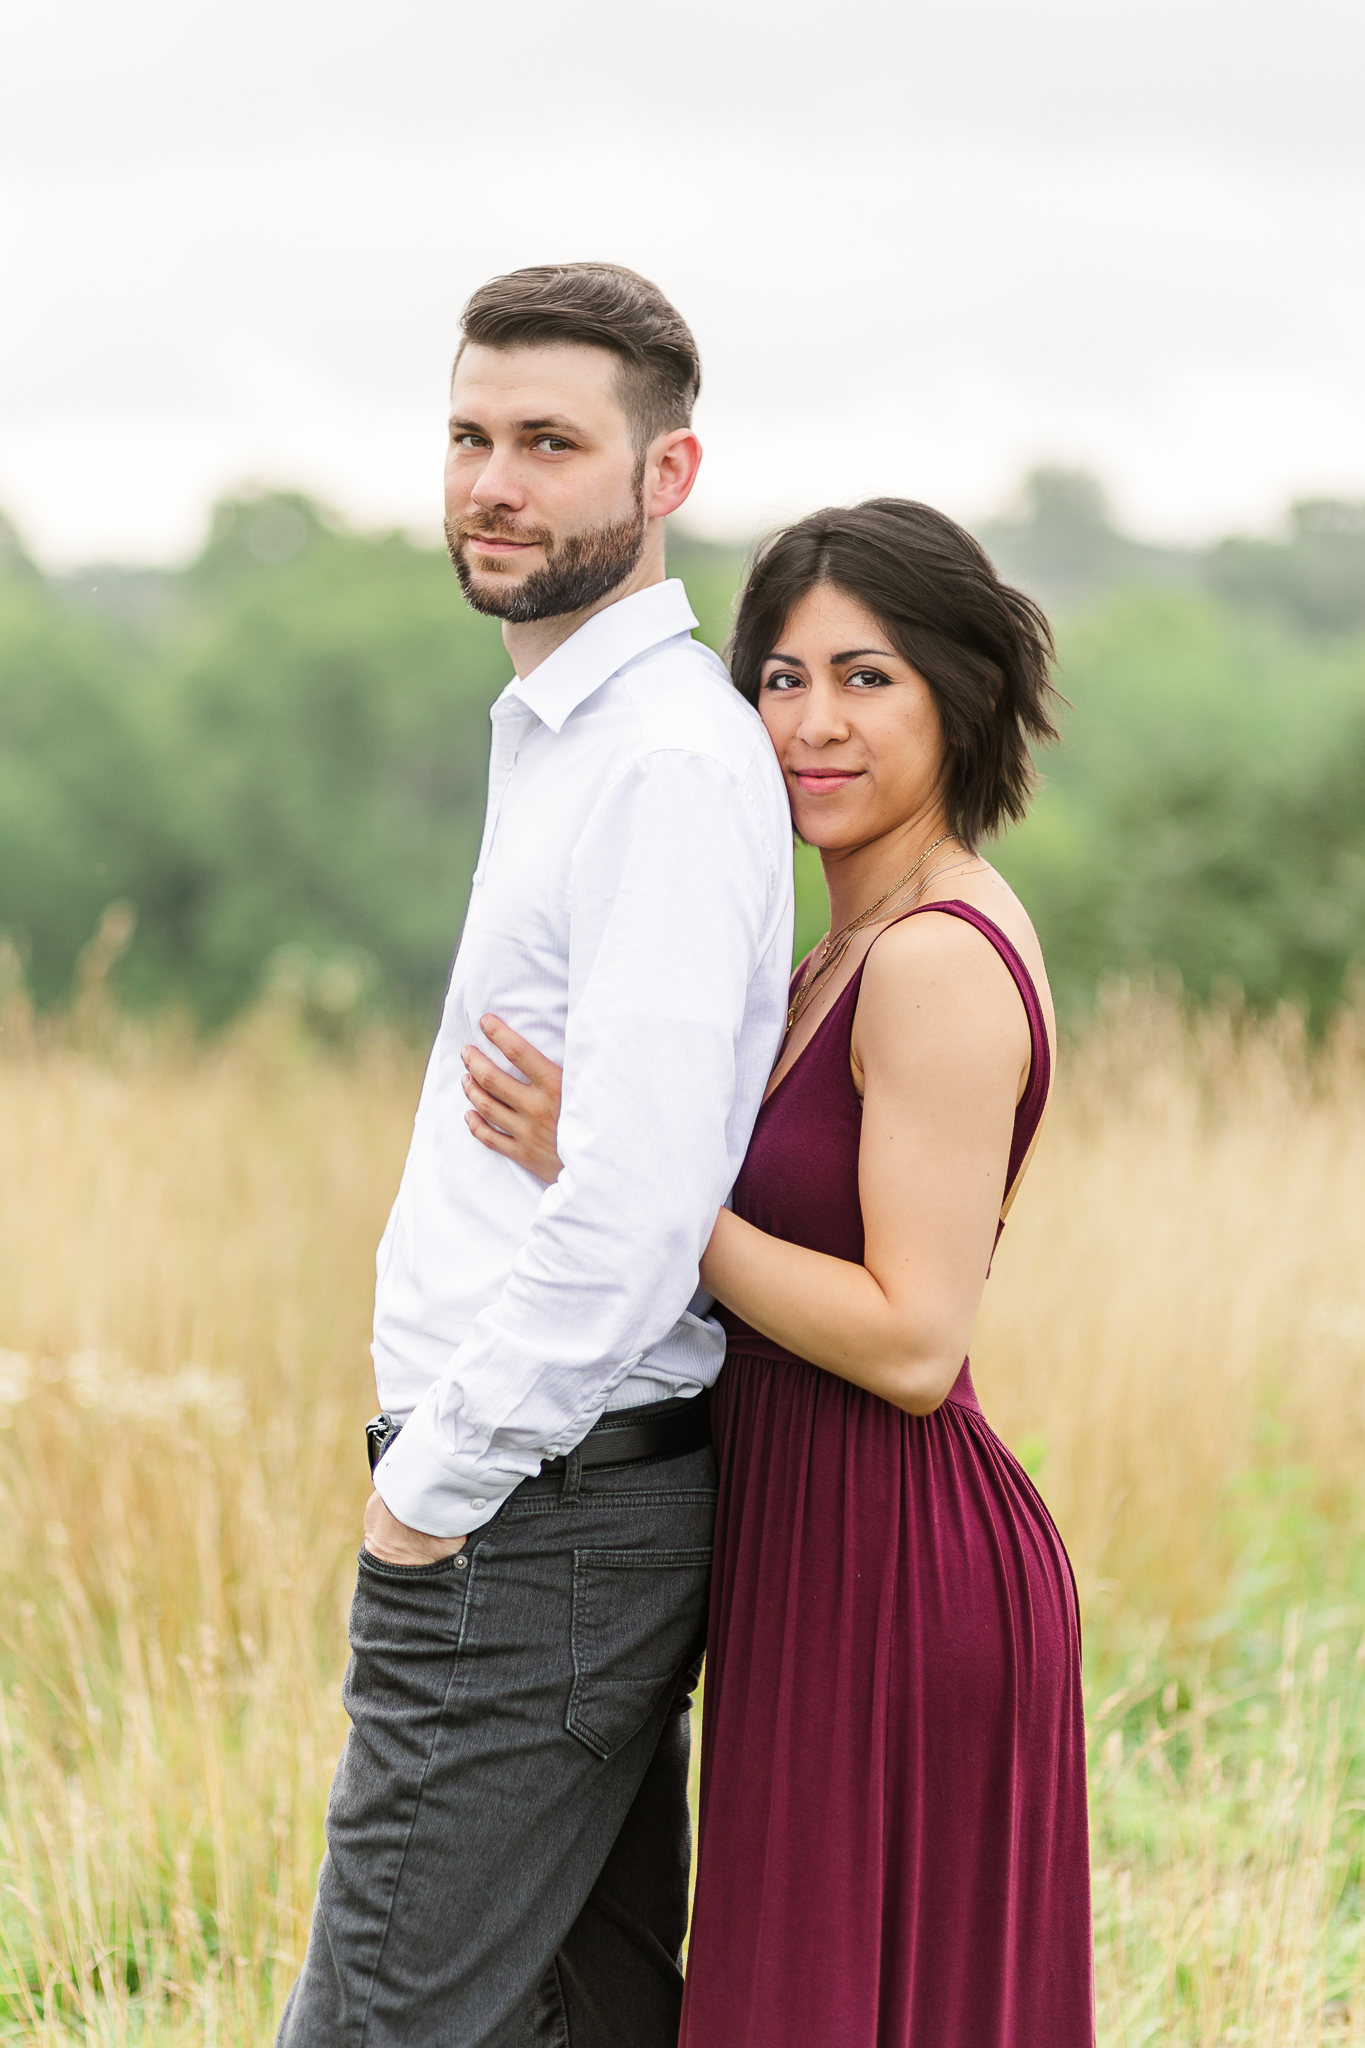 Mid-summer couples session at Manassas National Battlefield in Manassas, Virginia featuring the Stone House, Stone Bridge, and Chinn Ridge.